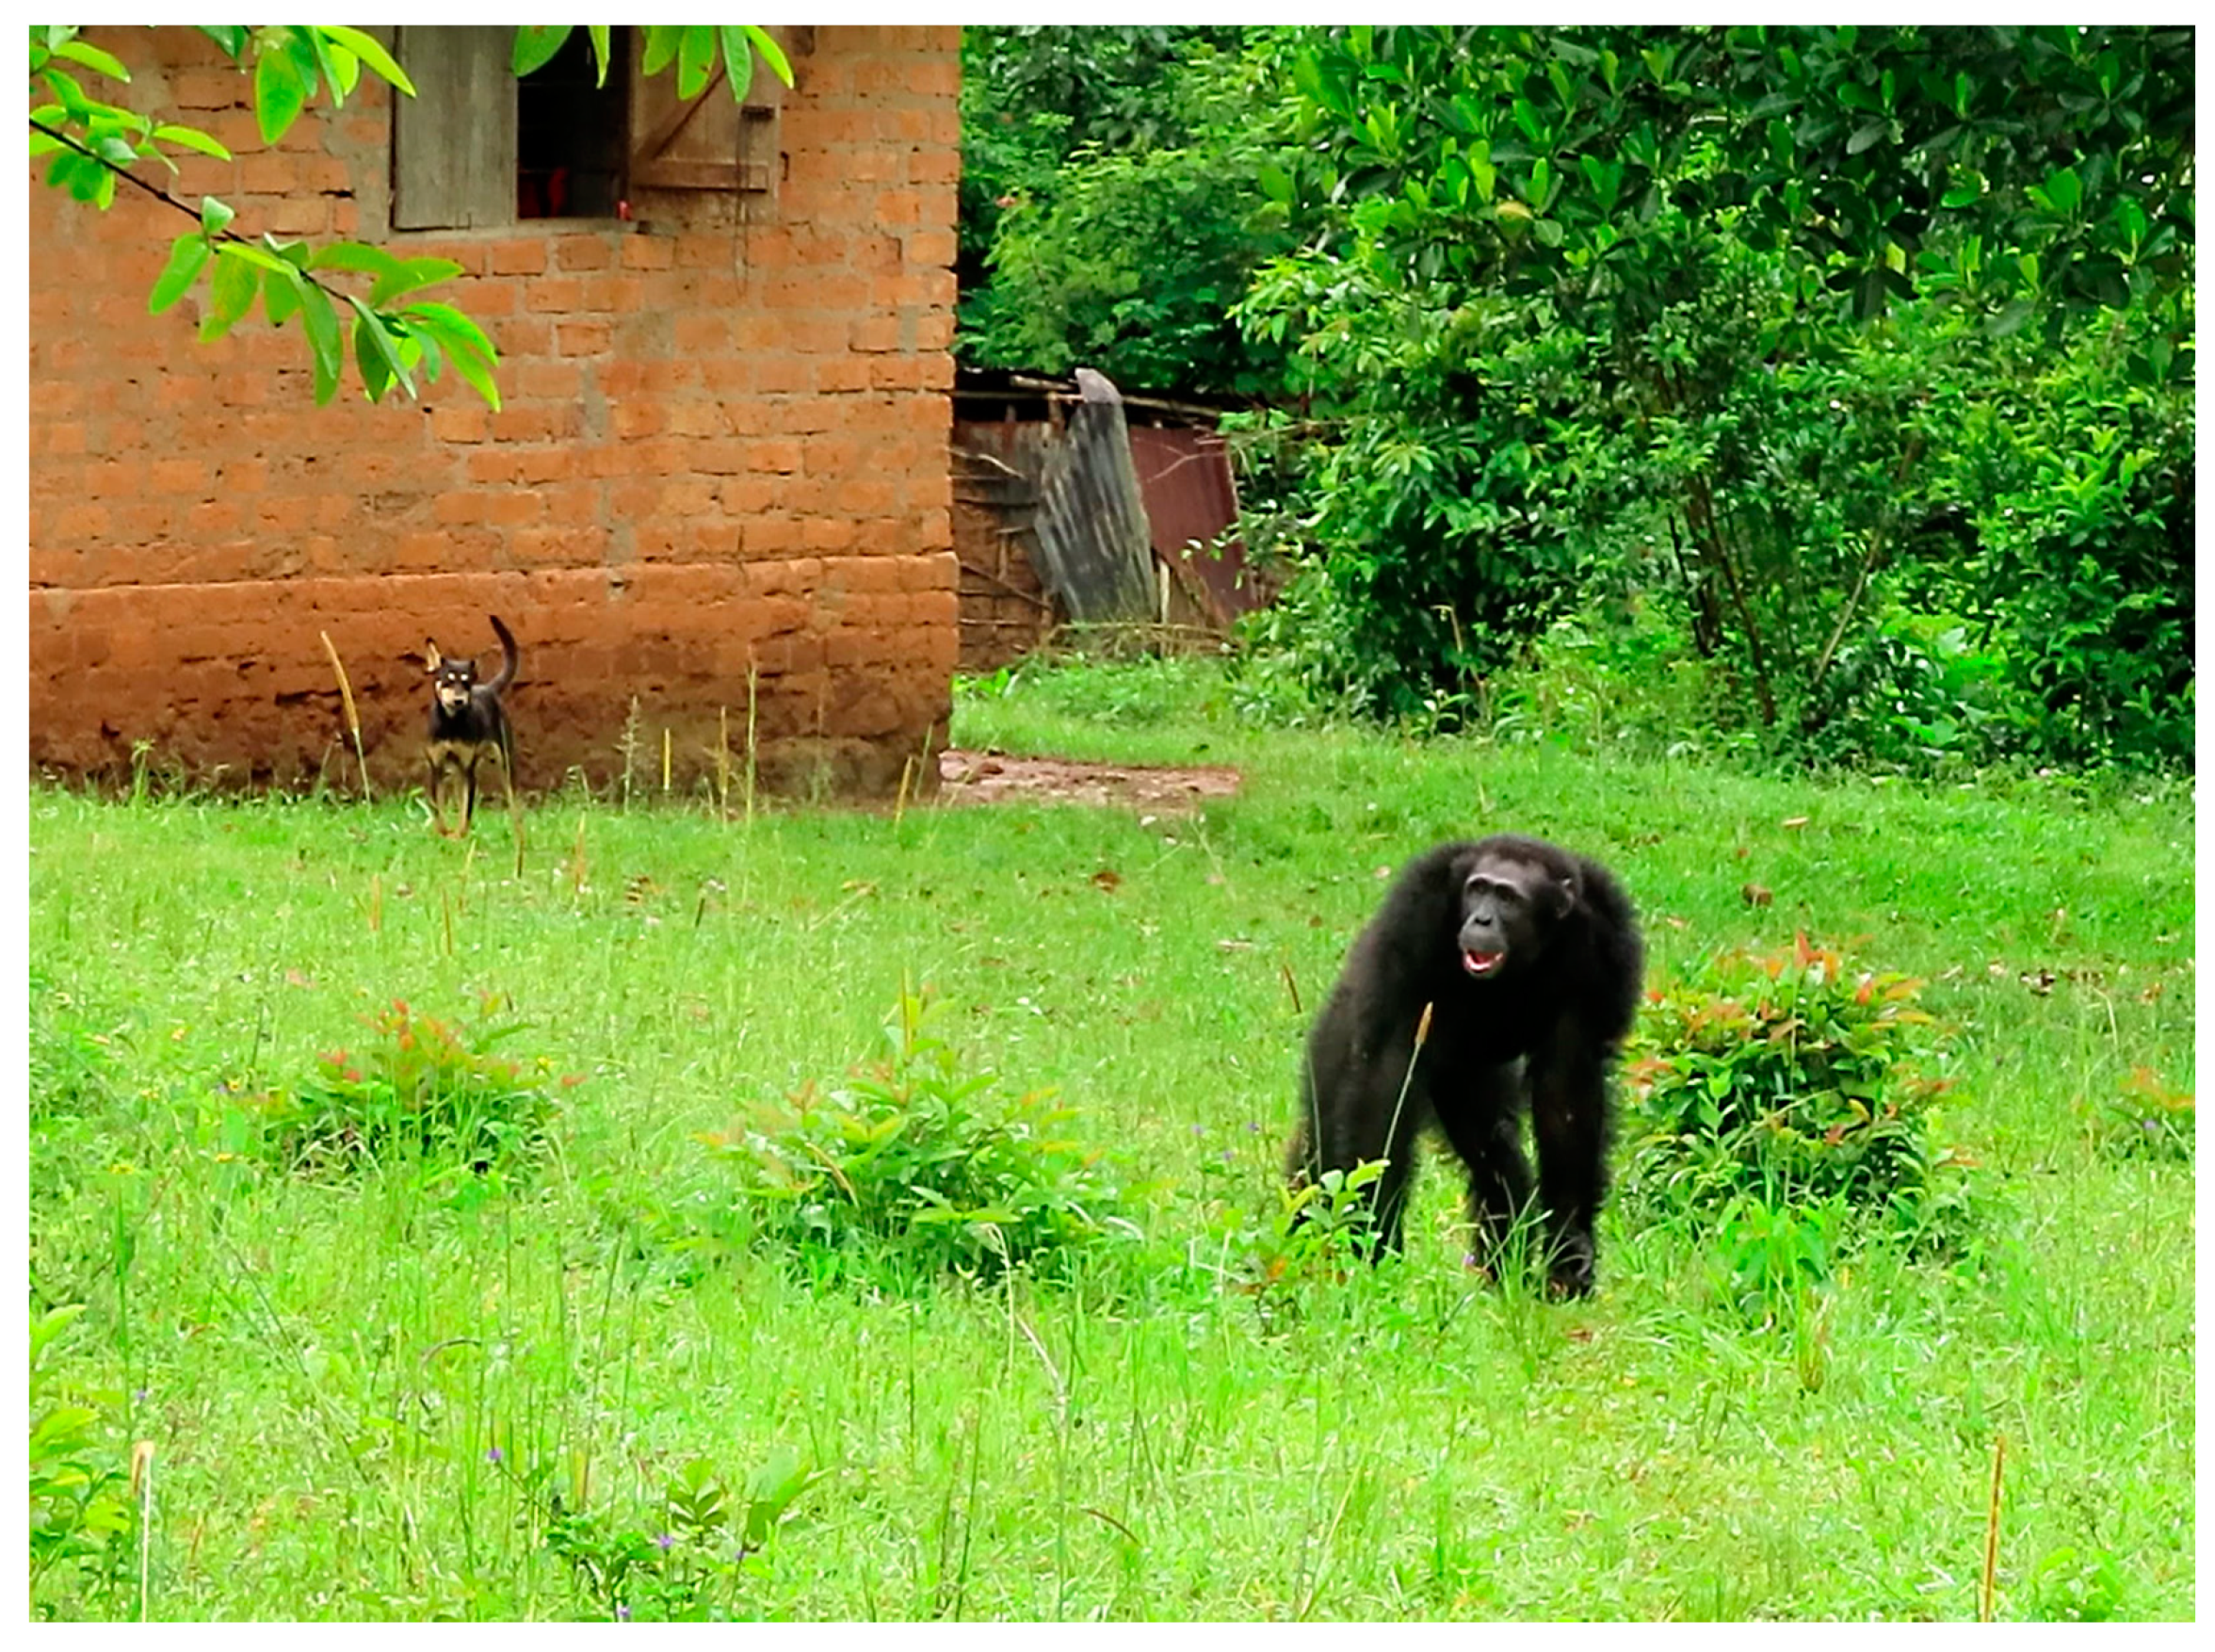 Pathogens | Free Full-Text | Sparse Evidence for Giardia intestinalis,  Cryptosporidium spp. and Microsporidia Infections in Humans, Domesticated  Animals and Wild Nonhuman Primates Sharing a Farm–Forest Mosaic Landscape  in Western Uganda